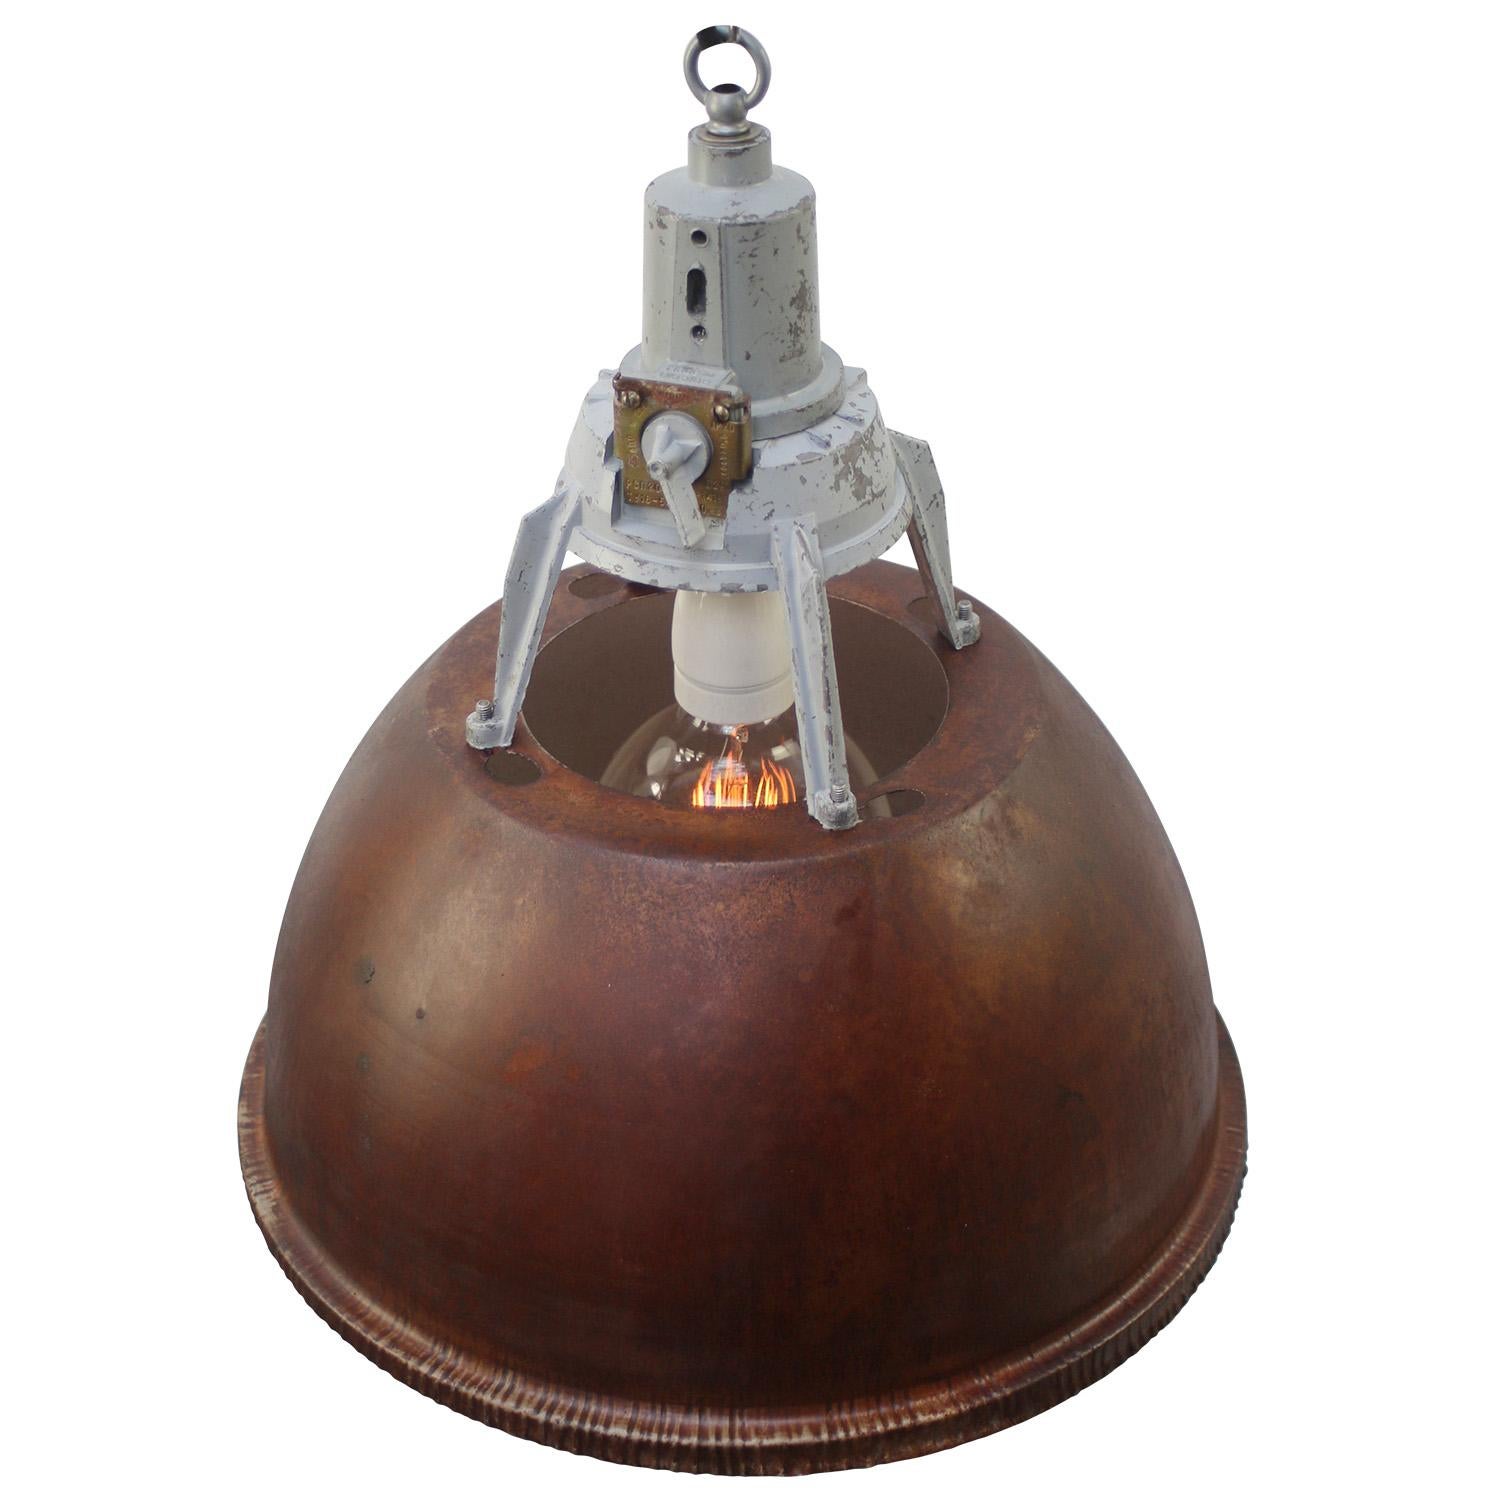 Industrial pendant
Rust brown metal shade, metal inside.
Gray cast aluminum top

Weight: 2.90 kg / 6.4 lb

Priced per individual item. All lamps have been made suitable by international standards for incandescent light bulbs, energy-efficient and